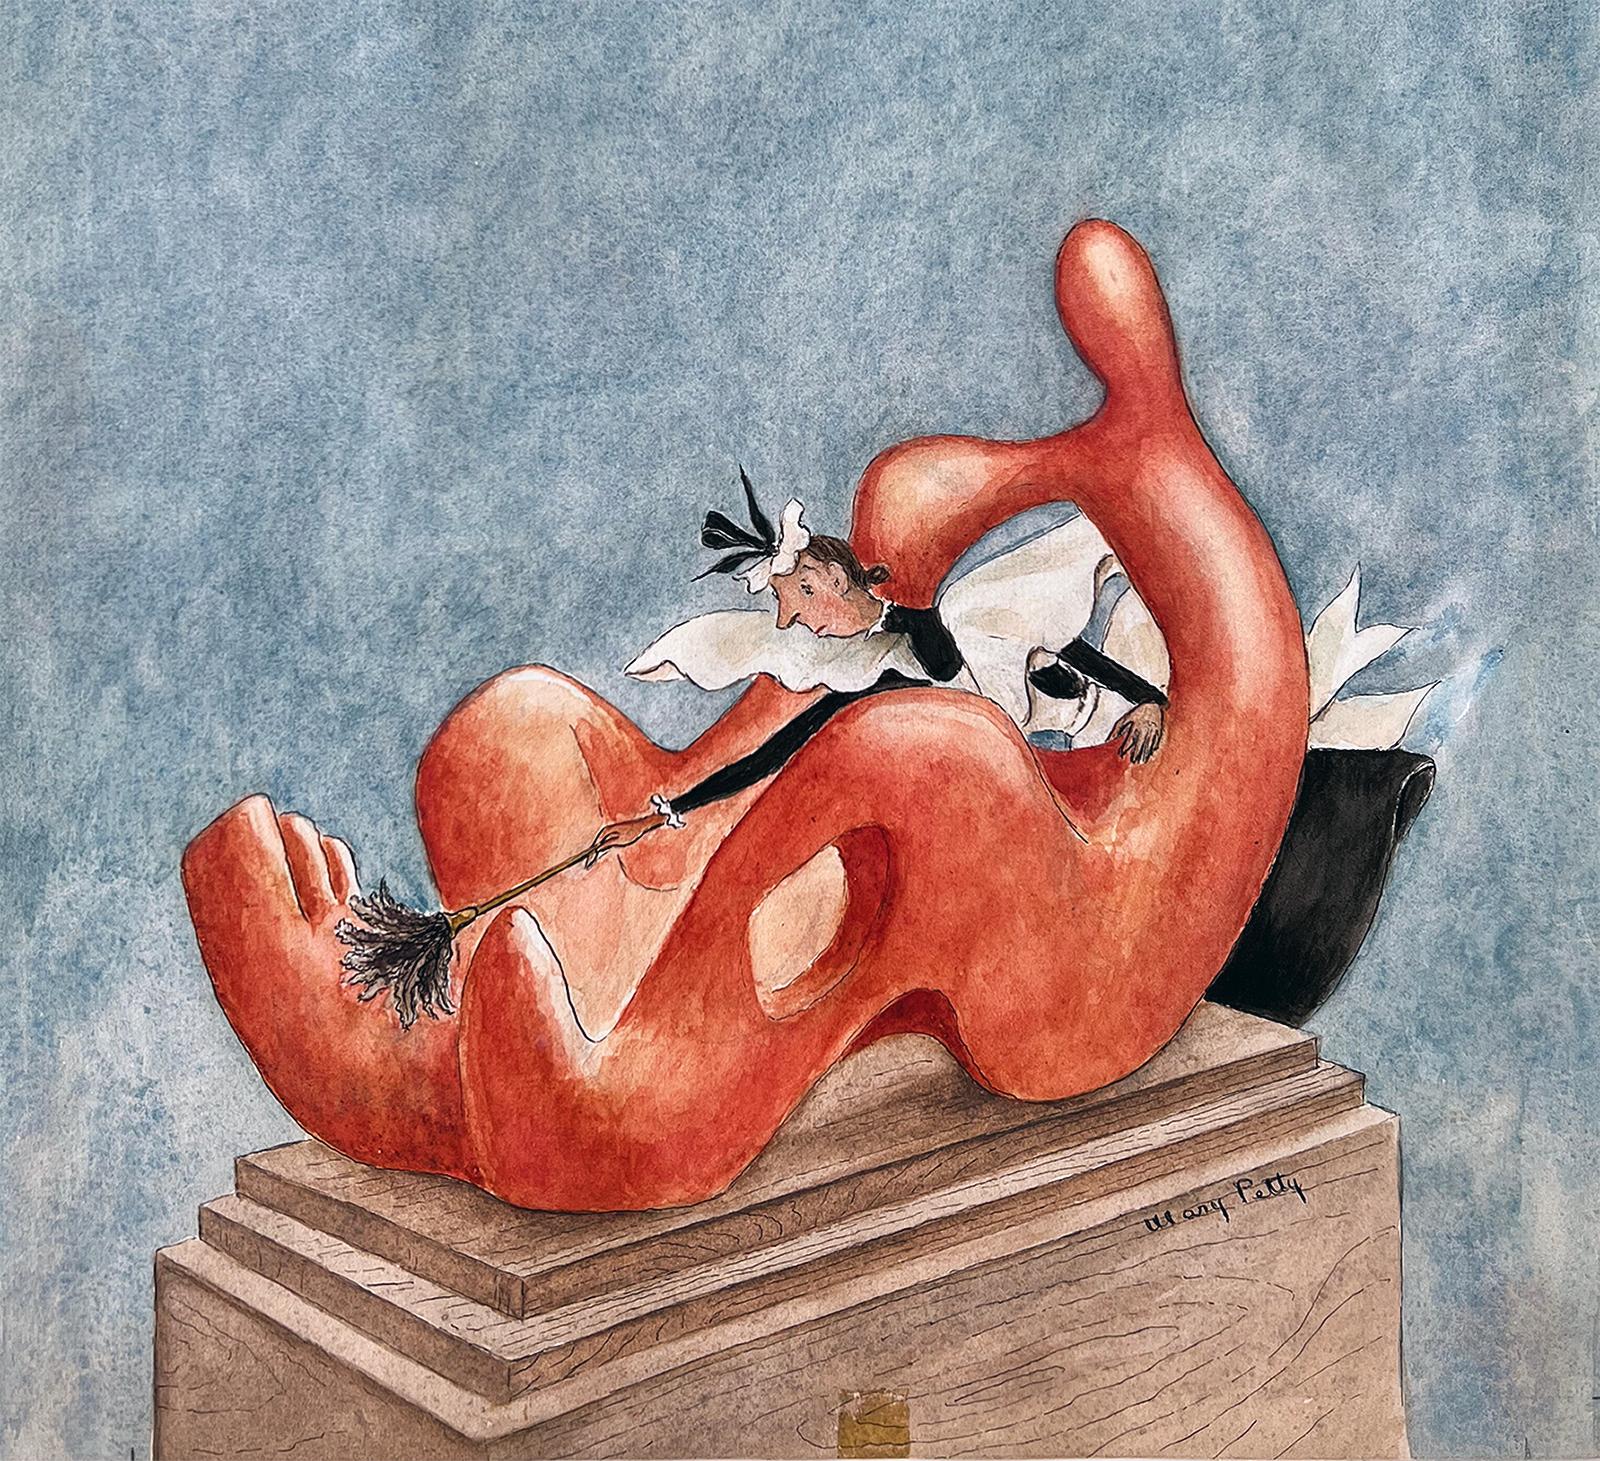 Class Struggle - Fay the Maid Dusts Henry Moore - New Yorker Magazine?